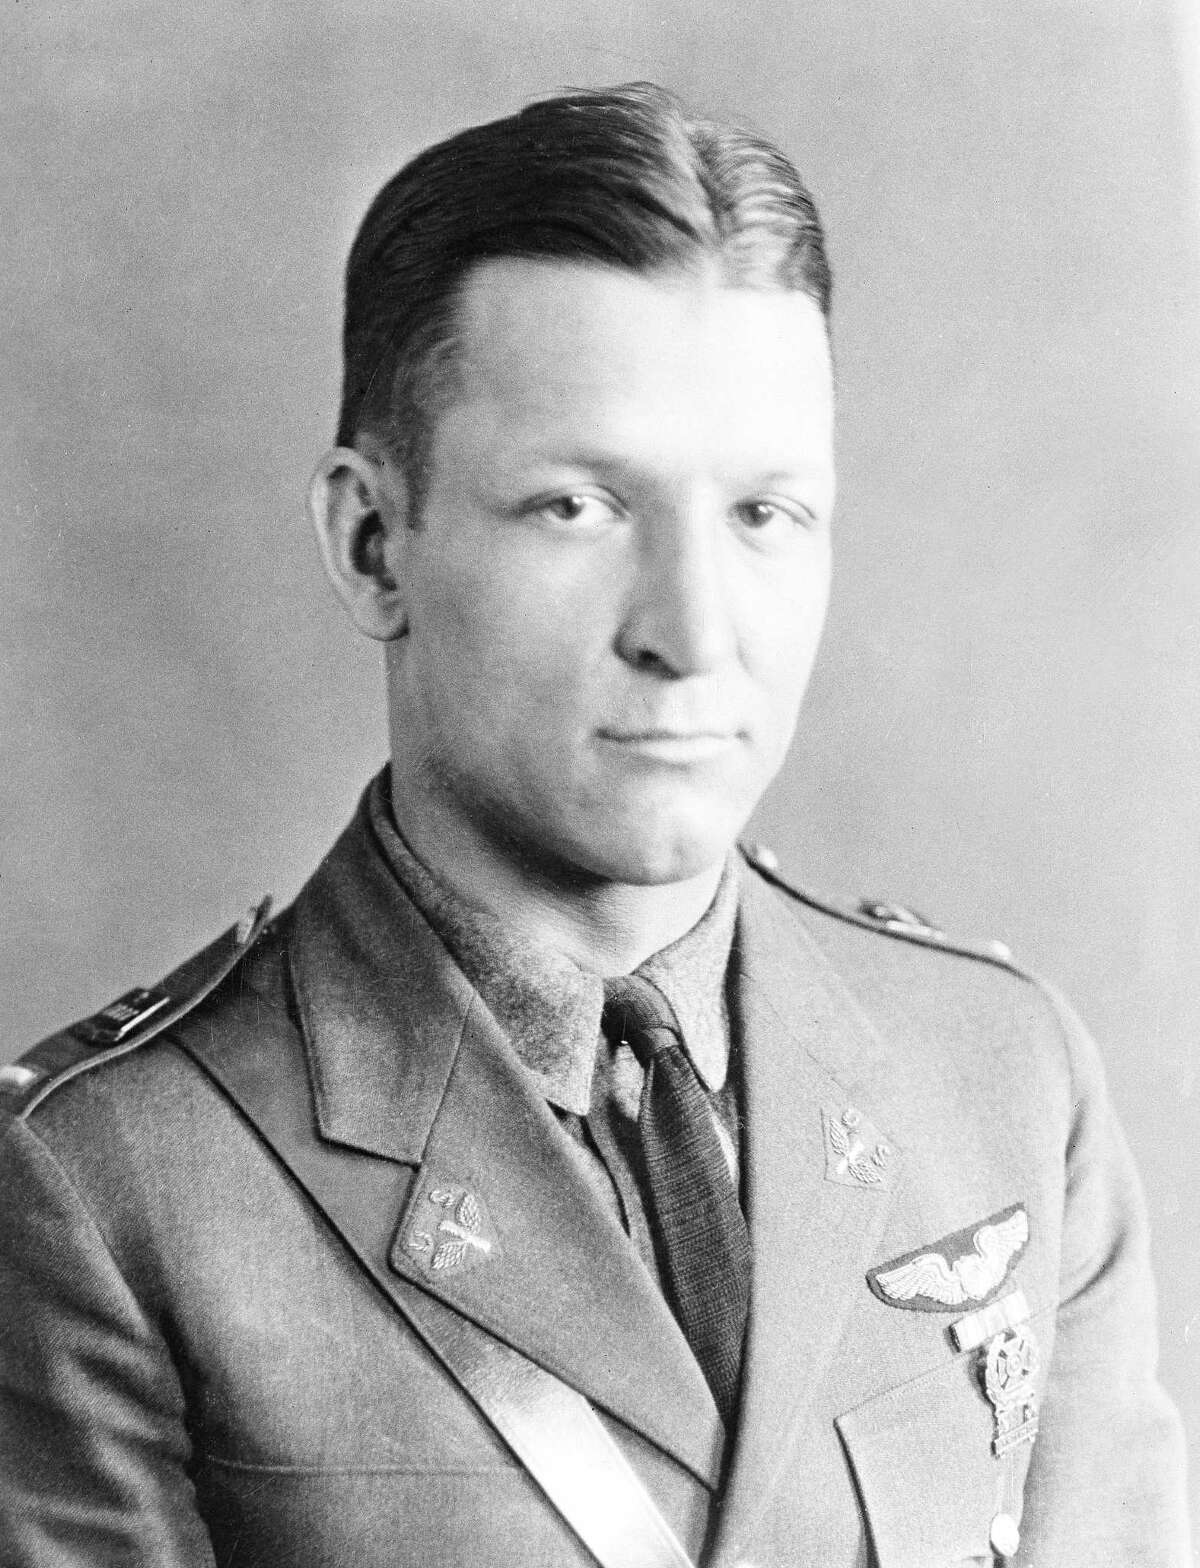 In this handout from the U.S. Air Force, Brig. Gen. Kenneth N. Walker of Glendale, Calif., is shown in this undated photo. Nearly 75 years after his father disappeared during a bombing mission over a remote Pacific island, Douglas Walker, the son of the highest-ranking recipient of the Medal of Honor still listed as missing from World War II, is pushing for renewed interest in finding the crash site and the remains of the crew. (AP Photo/USAF)